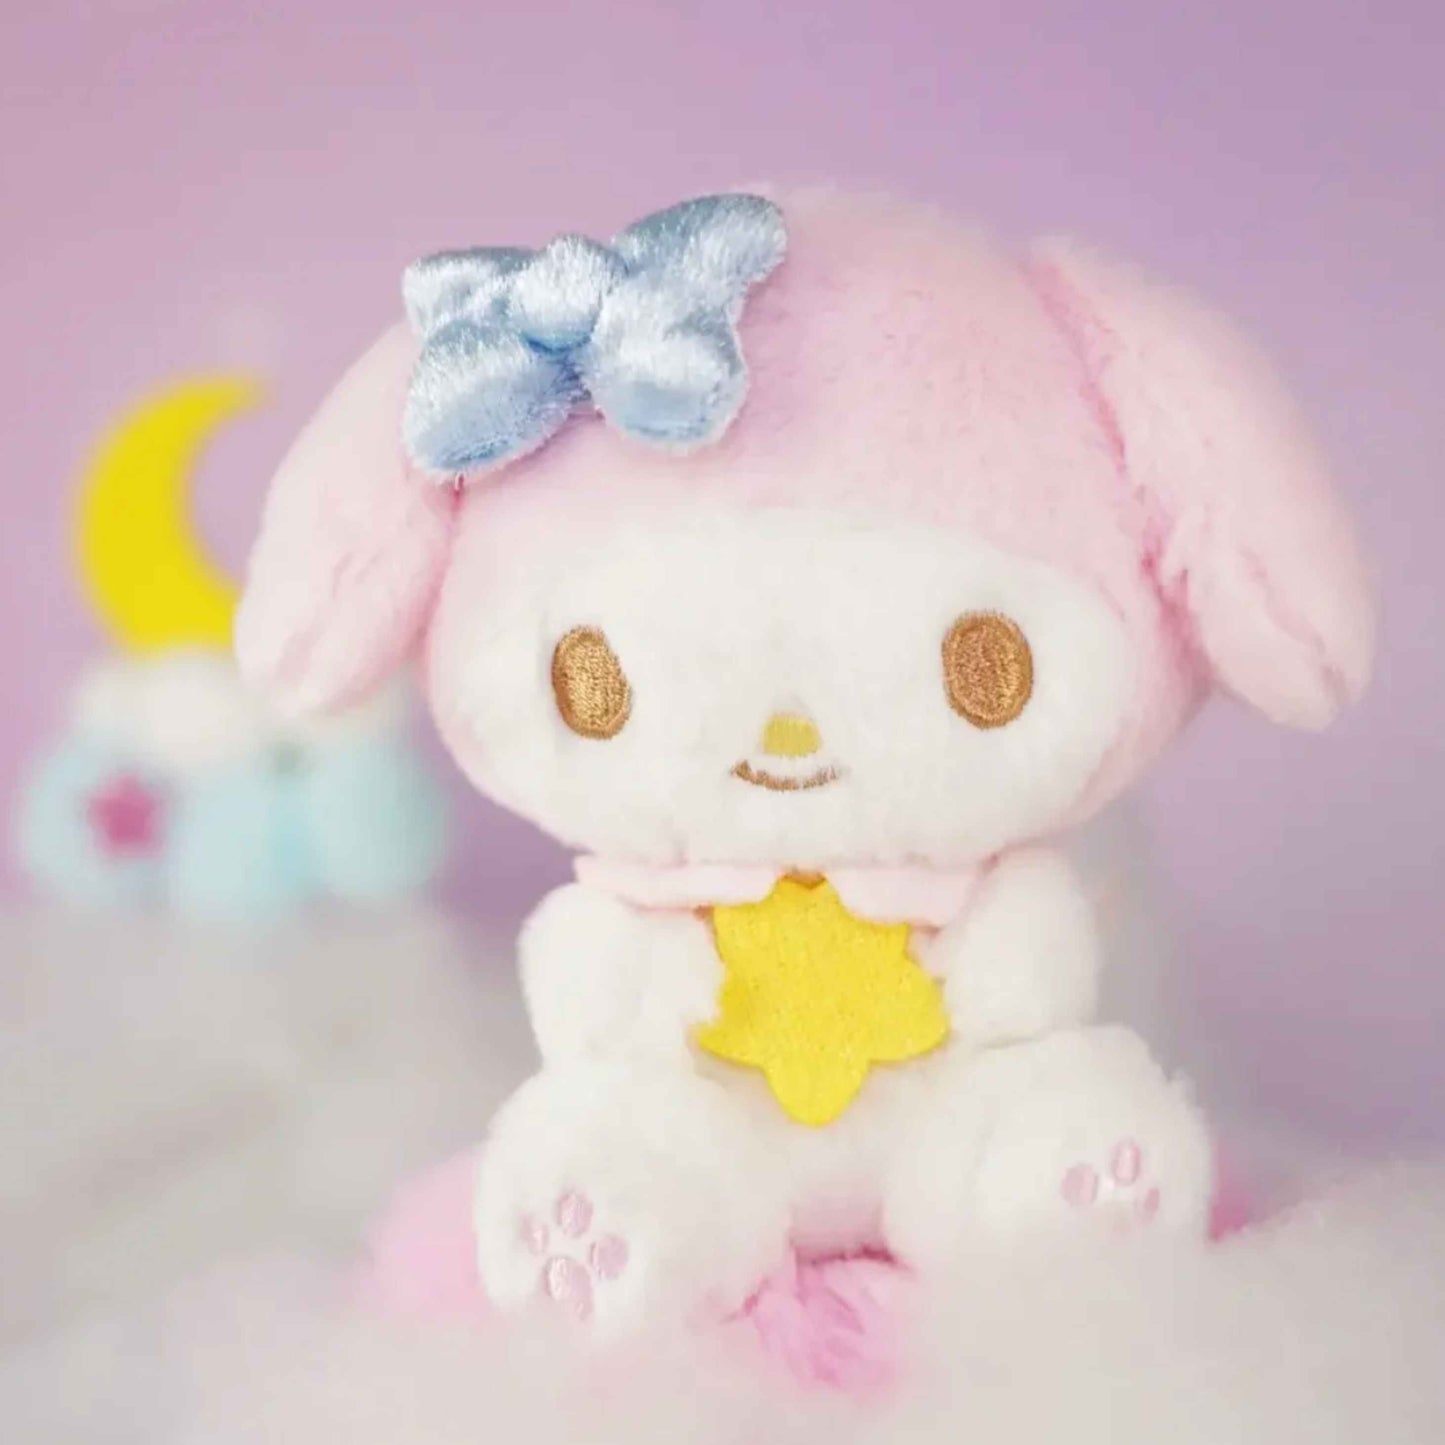 【Restock】Top Toy Sanrio Characters Starry Cloud Plush Blind Box Random Style